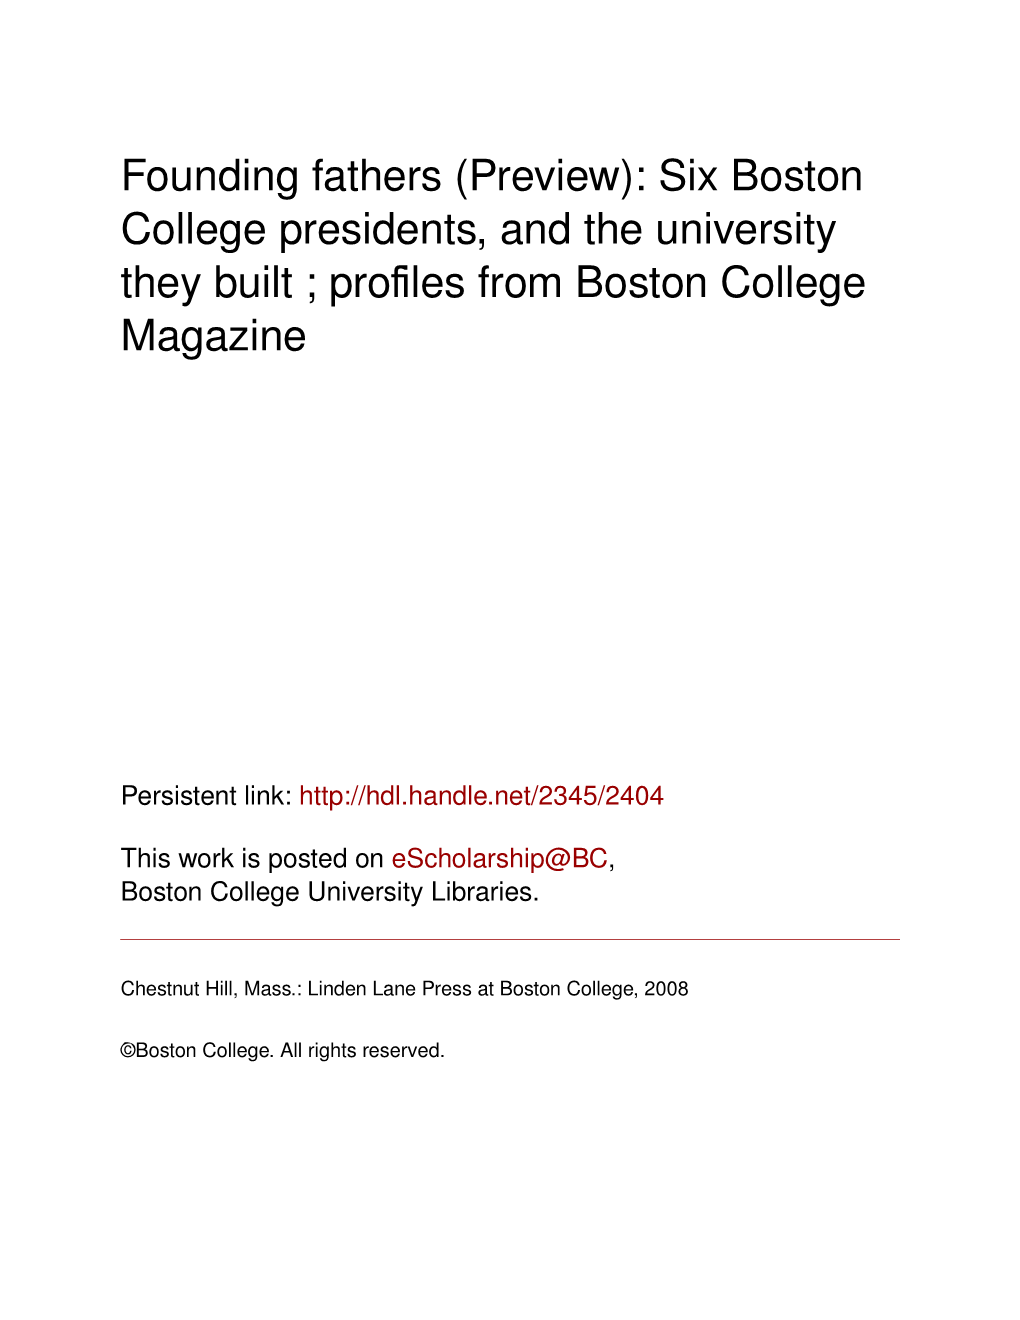 Six Boston College Presidents, and the University They Built ; Proﬁles from Boston College Magazine